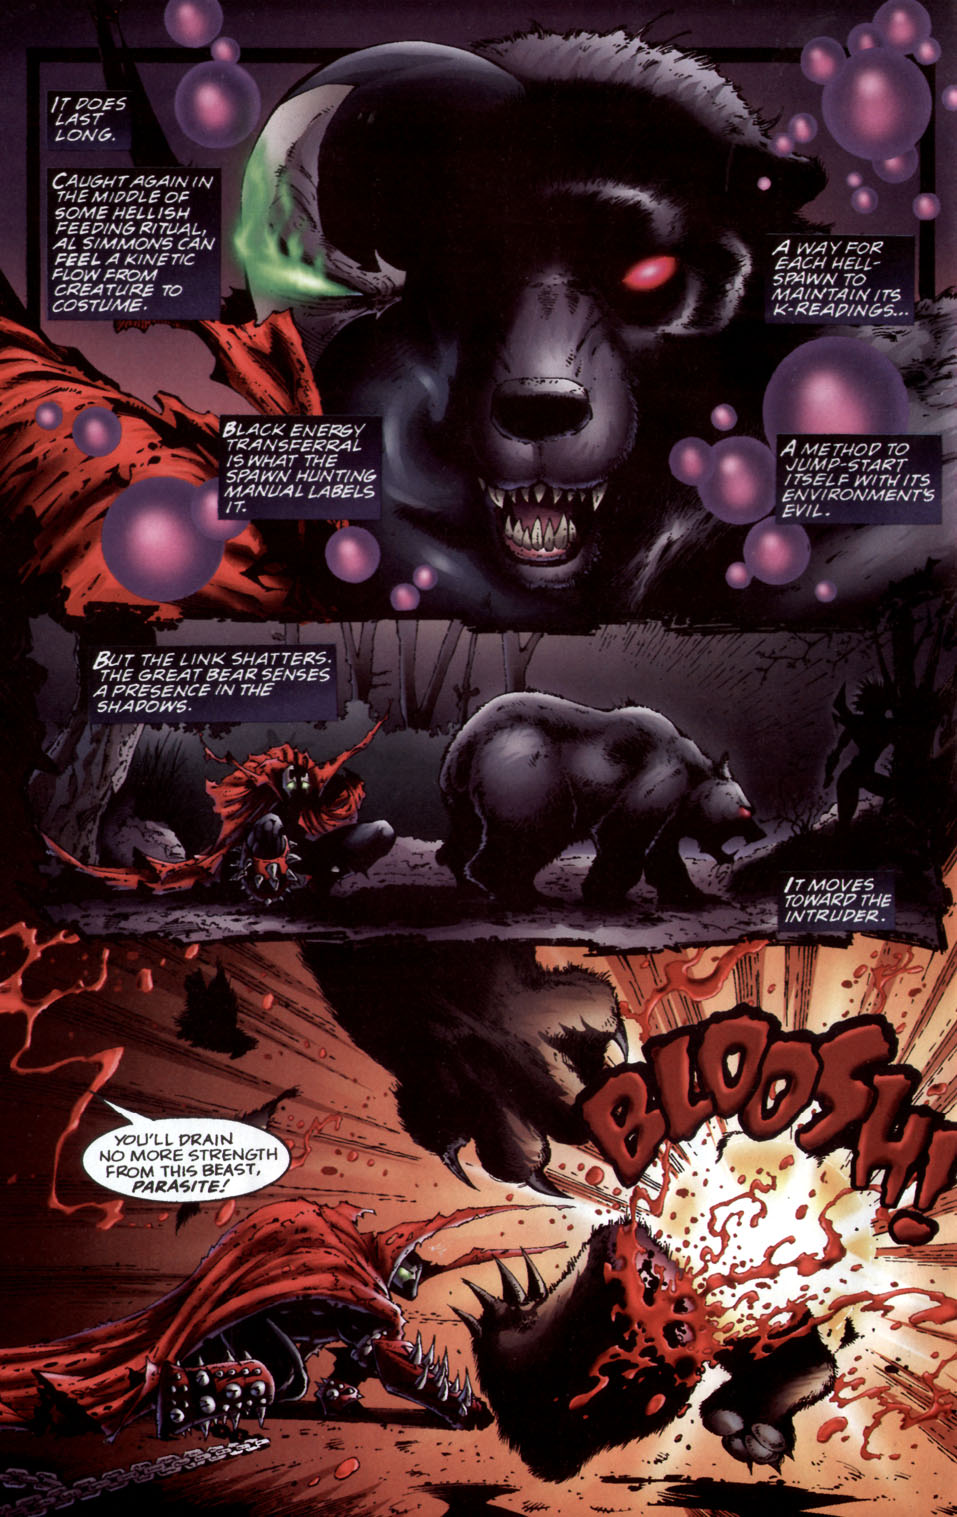 supervillain - It Does Last Long Caught Again In The Middle Of Some Hellish Feeding Ritual, Al Simmons Can Feel A Kinetic Flow From Creature To Costume A Way For Each Hell Spawn To Maintain Its KReadings... Black Energy Transferral 15 What The Spawn Hunti